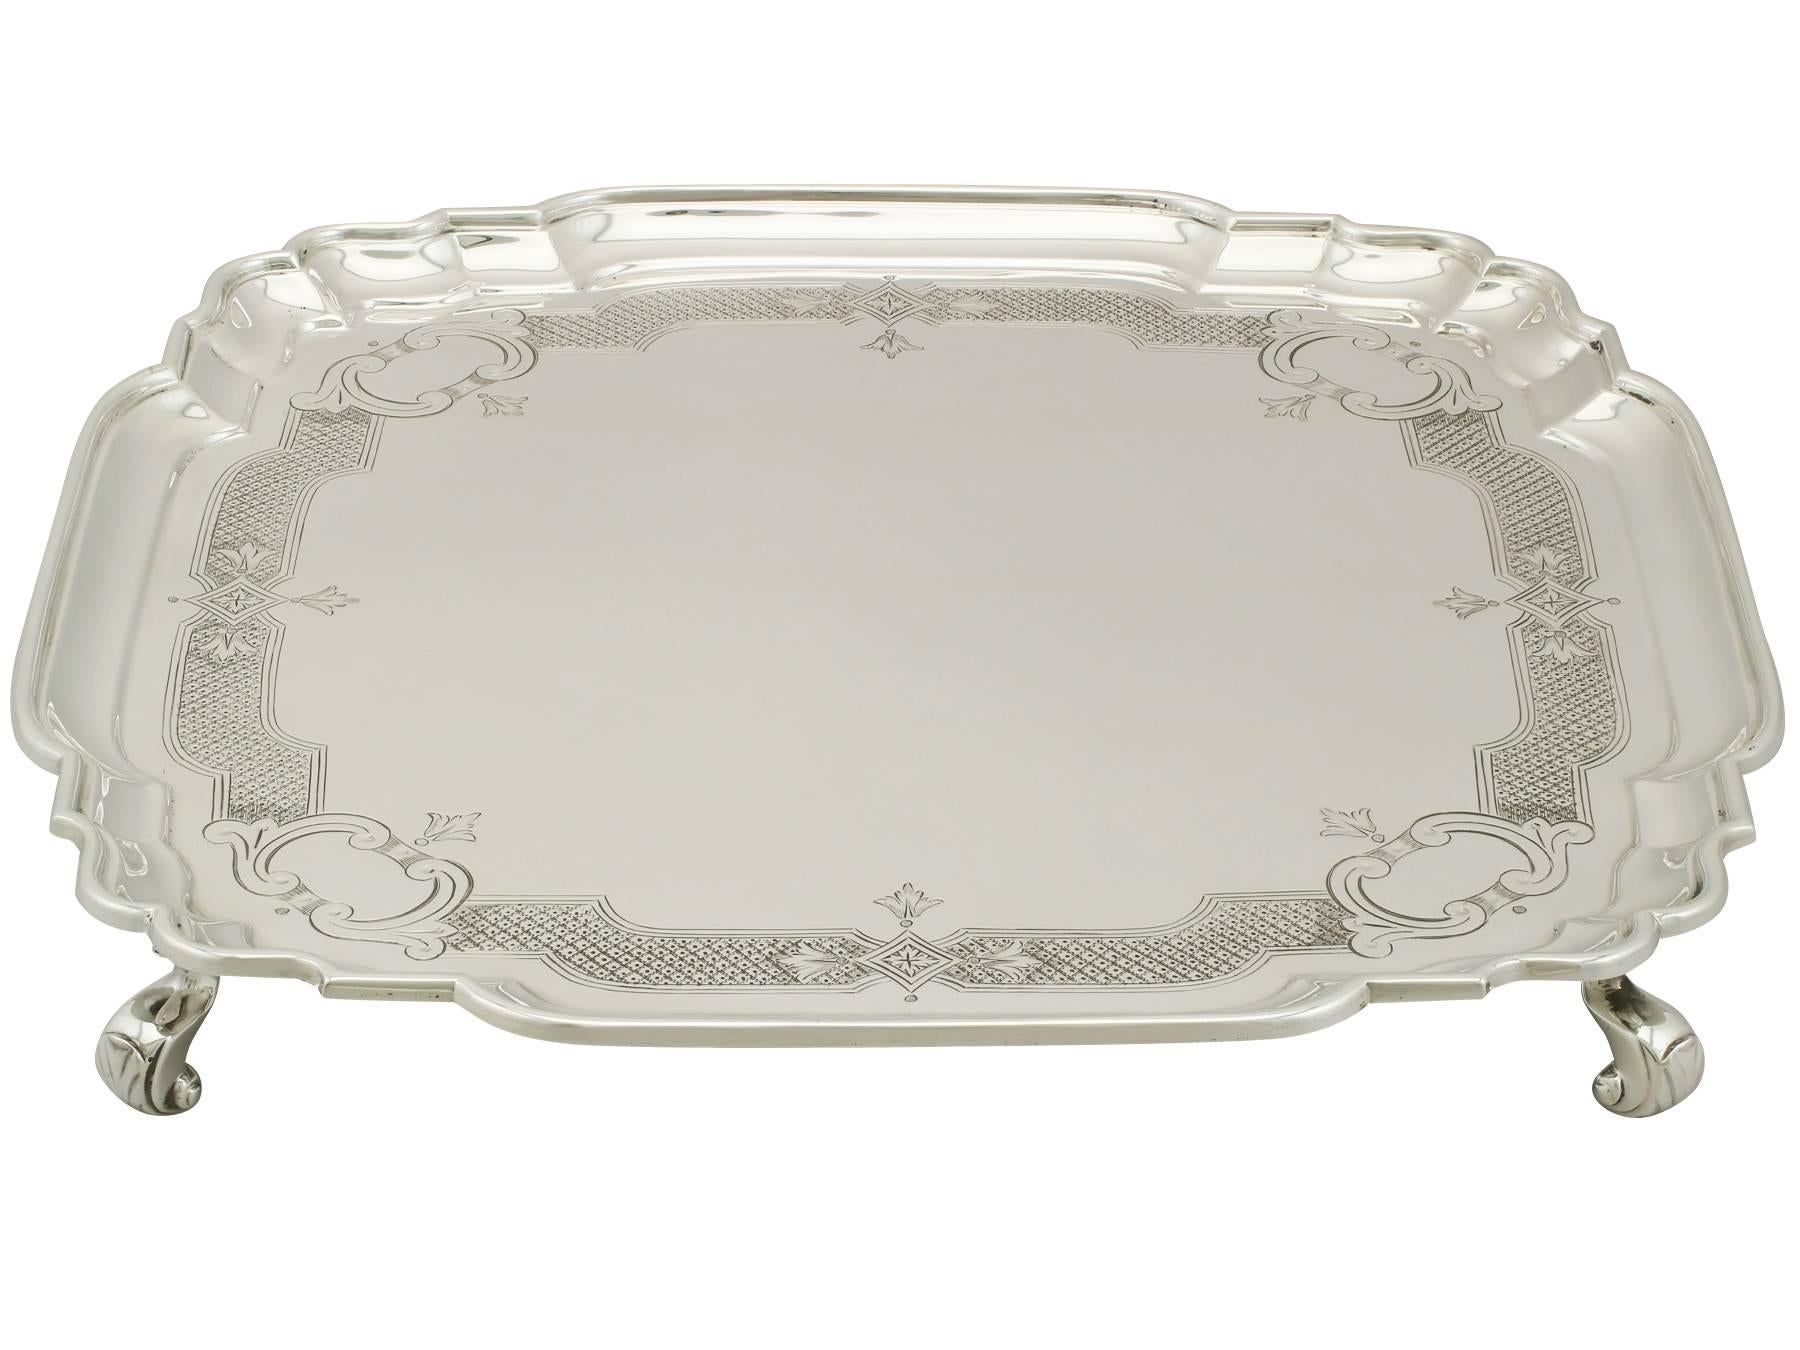 An exceptional, fine and impressive antique George V English sterling silver salver; an addition to our silver dining collection

This exceptional antique George V English silver salver, in sterling standard, has a square shaped form onto four